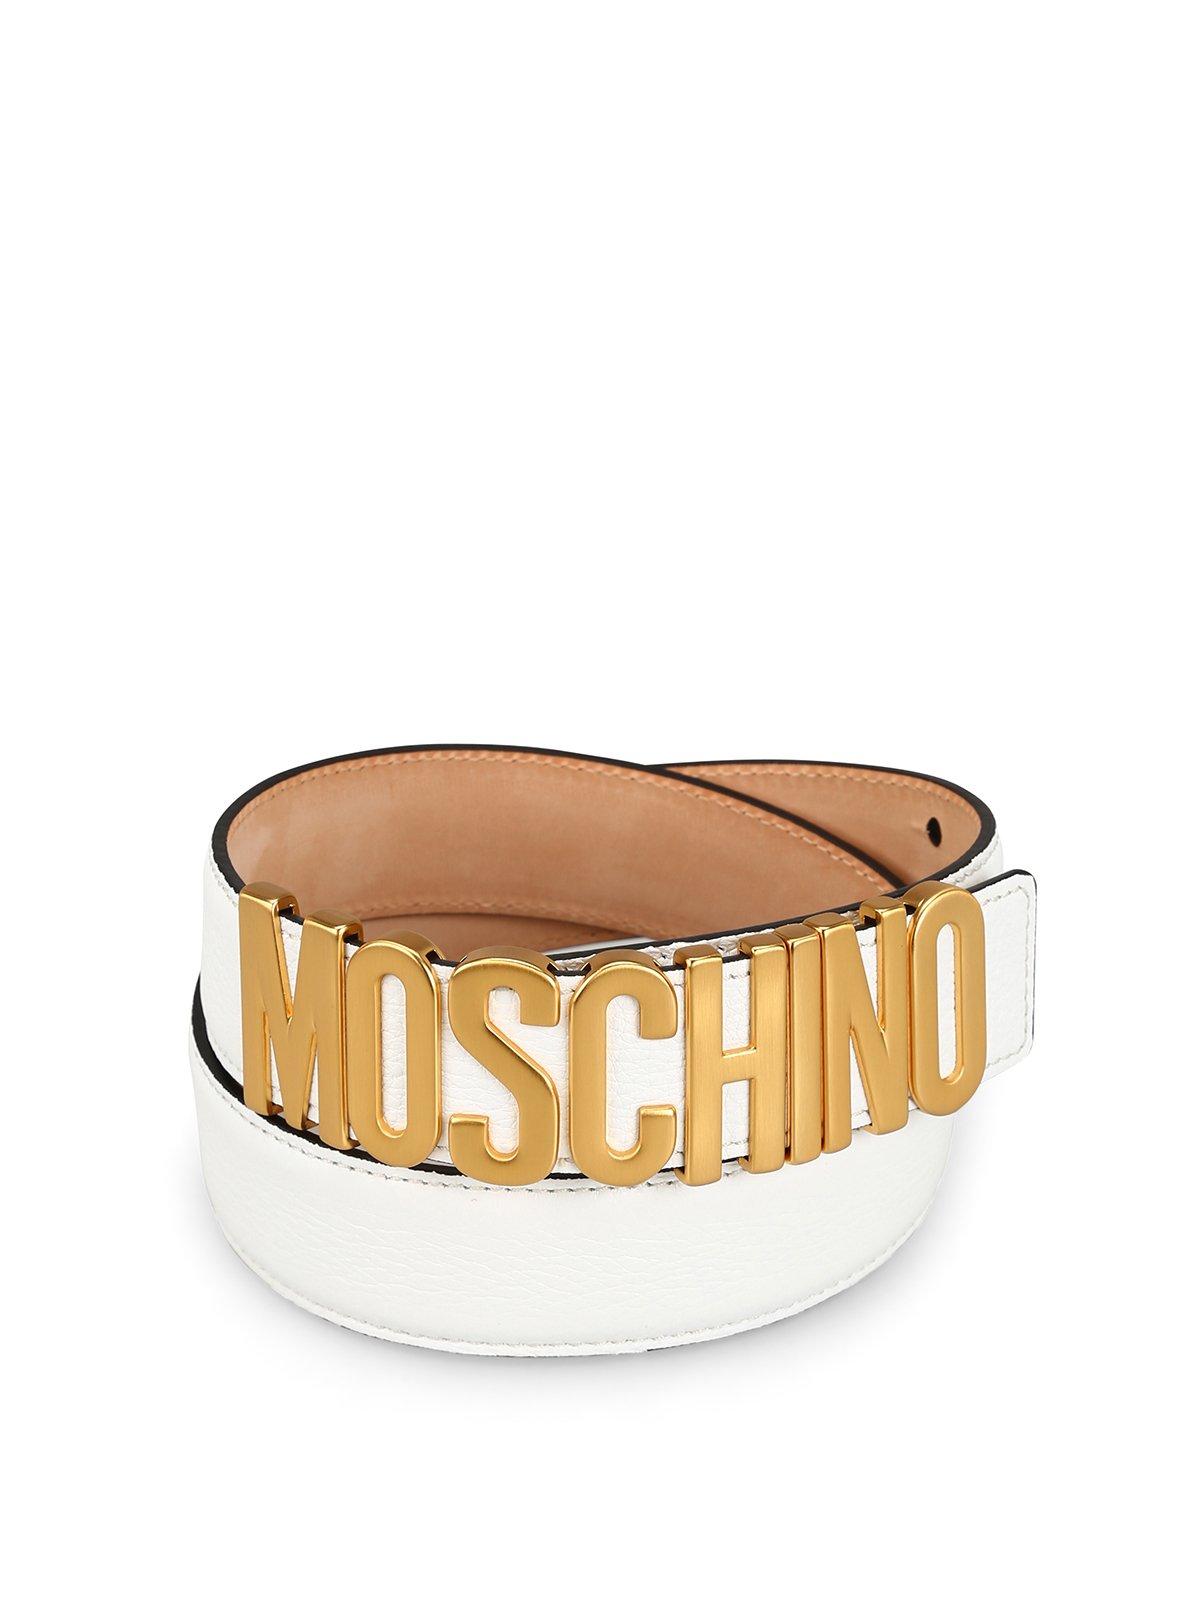 Moschino - White hammered leather logo belt - belts - A800980030001